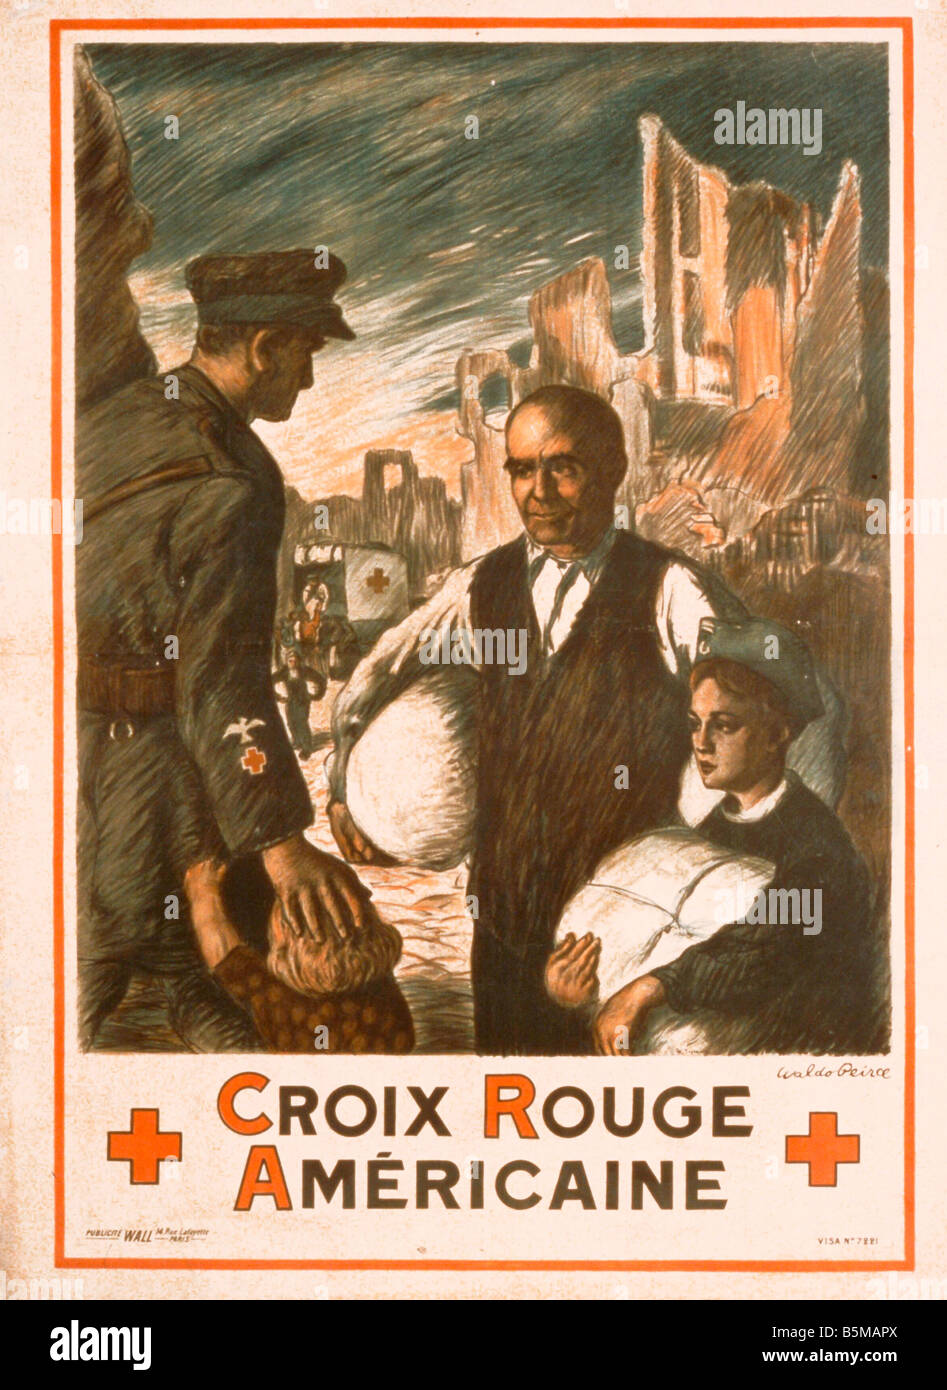 2 M20 R3 1918 Croix Rouge Americaine Poster 1918 Medicine Red Cross Croix Rouge Americaine propaganda for the American Red Cross Stock Photo